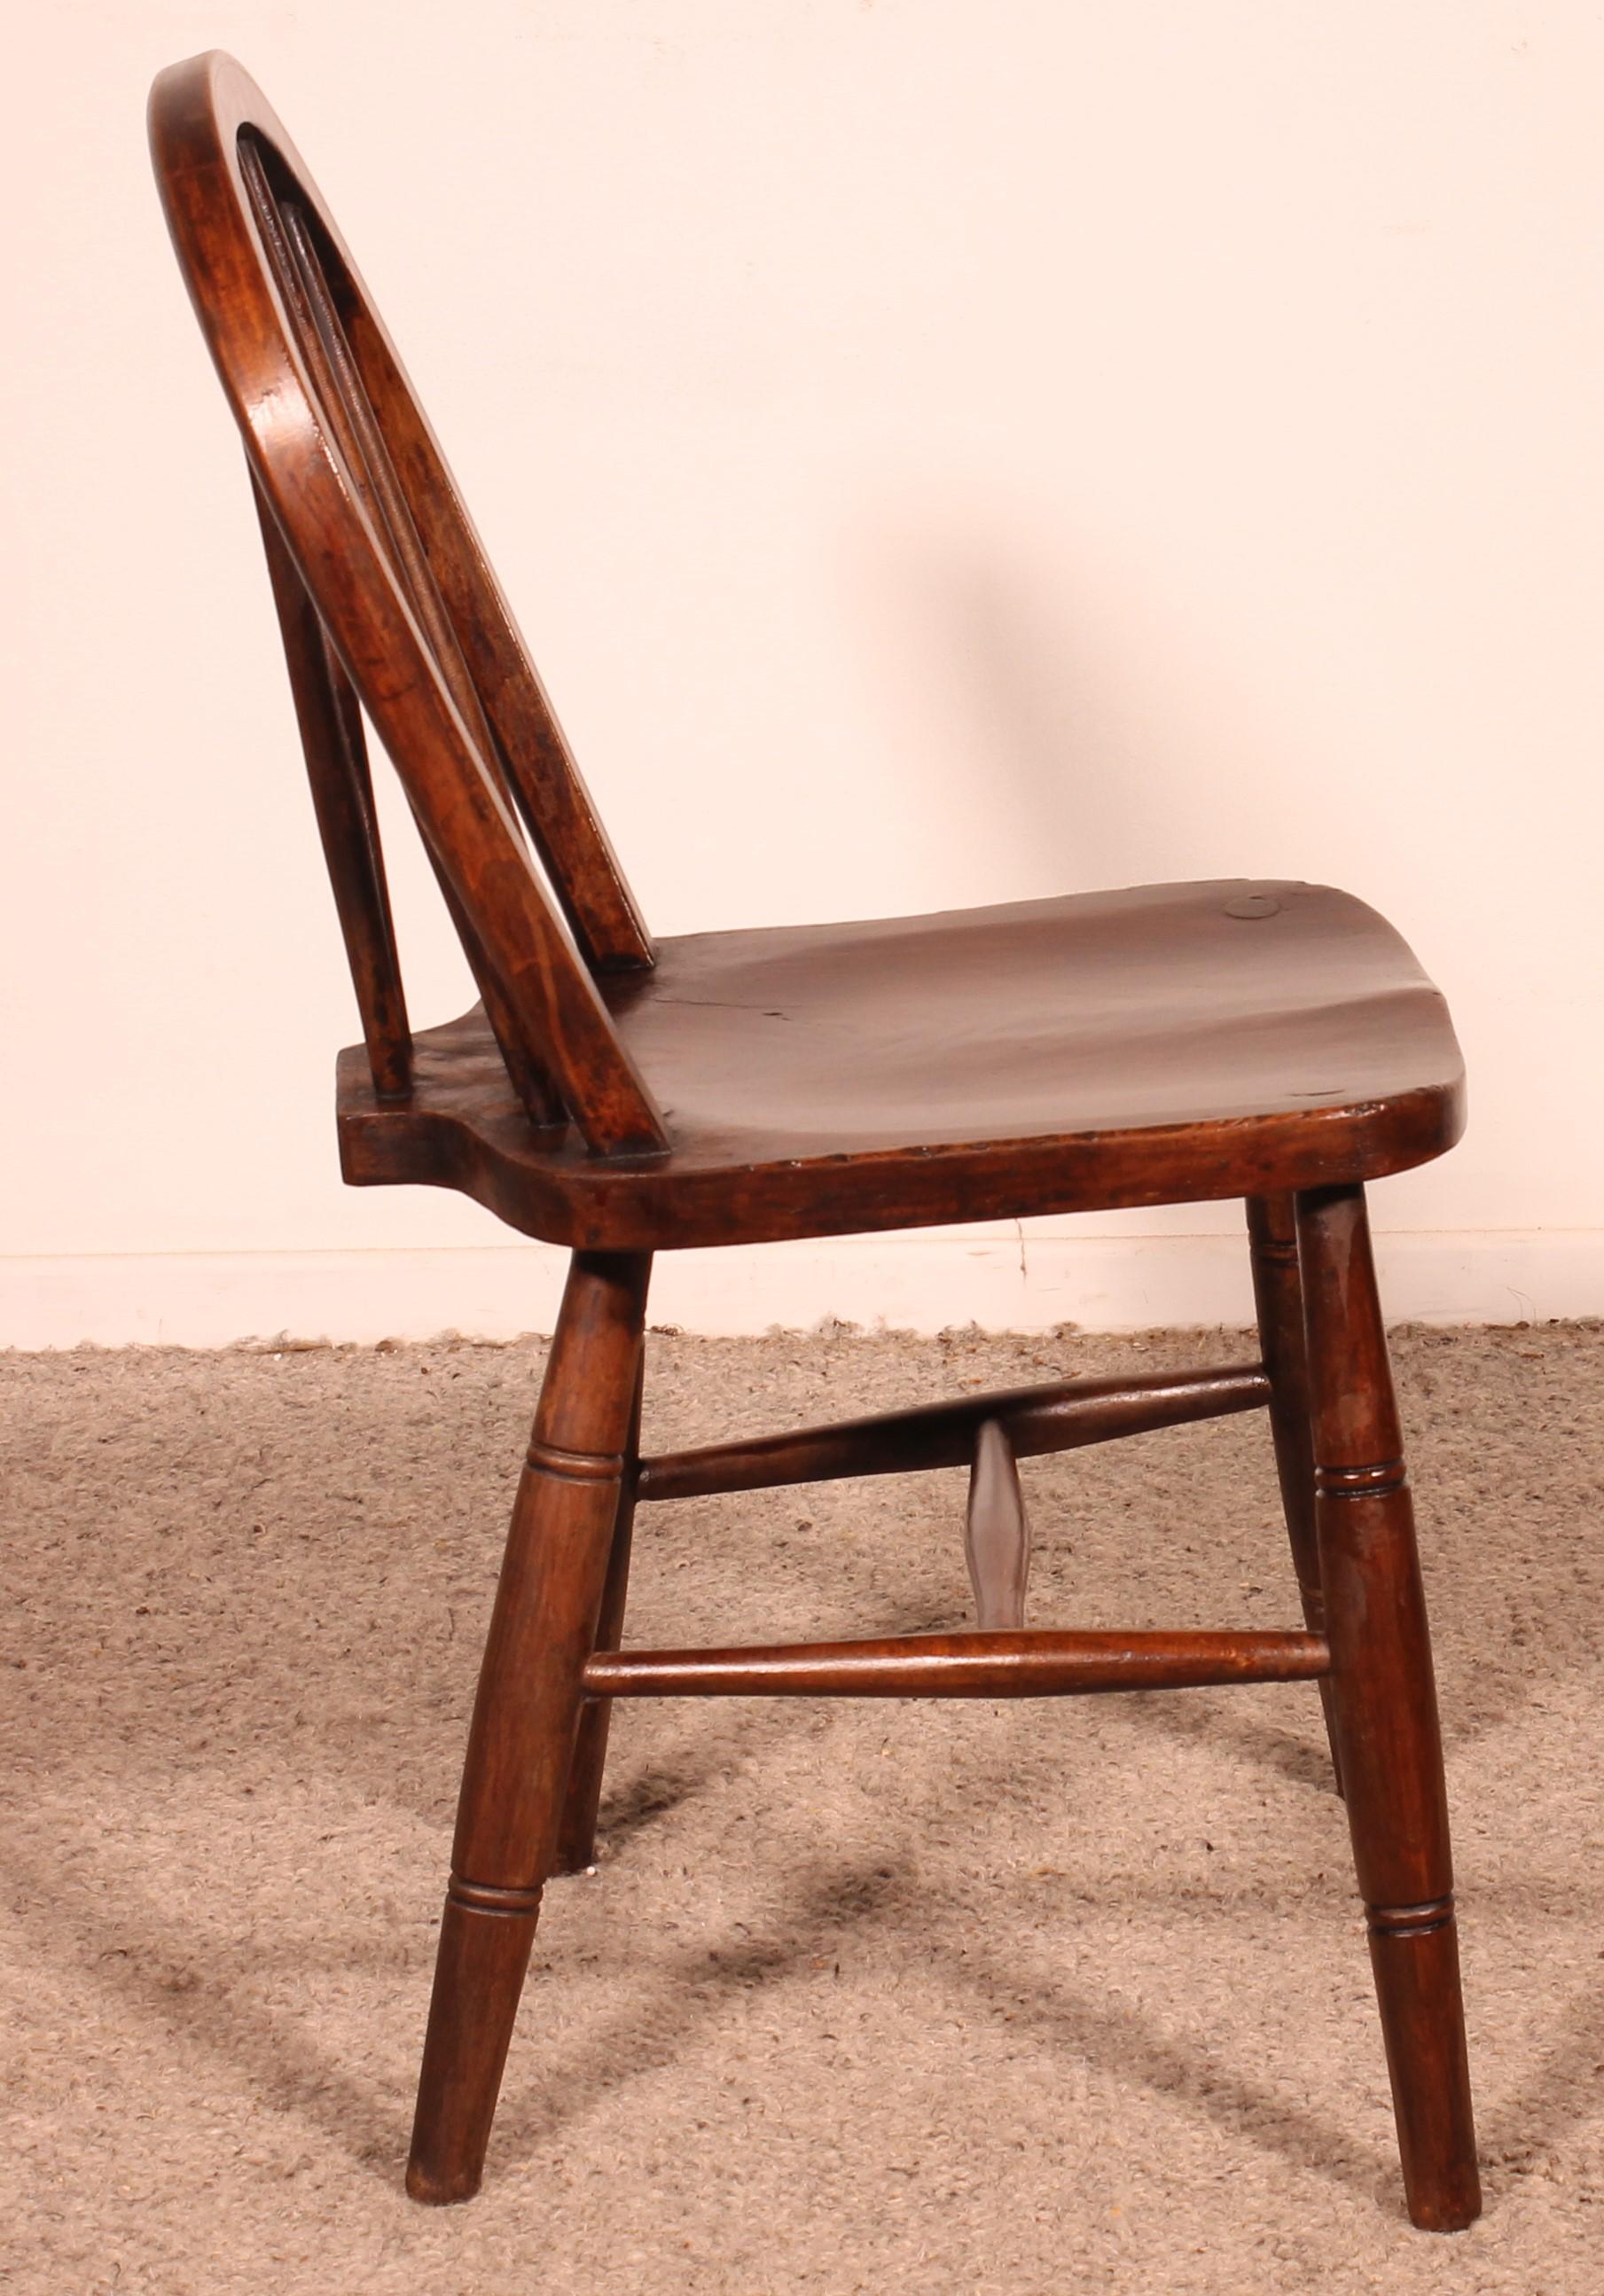 Set Of 4 Windsor Chairs From The 19th Century For Sale 5